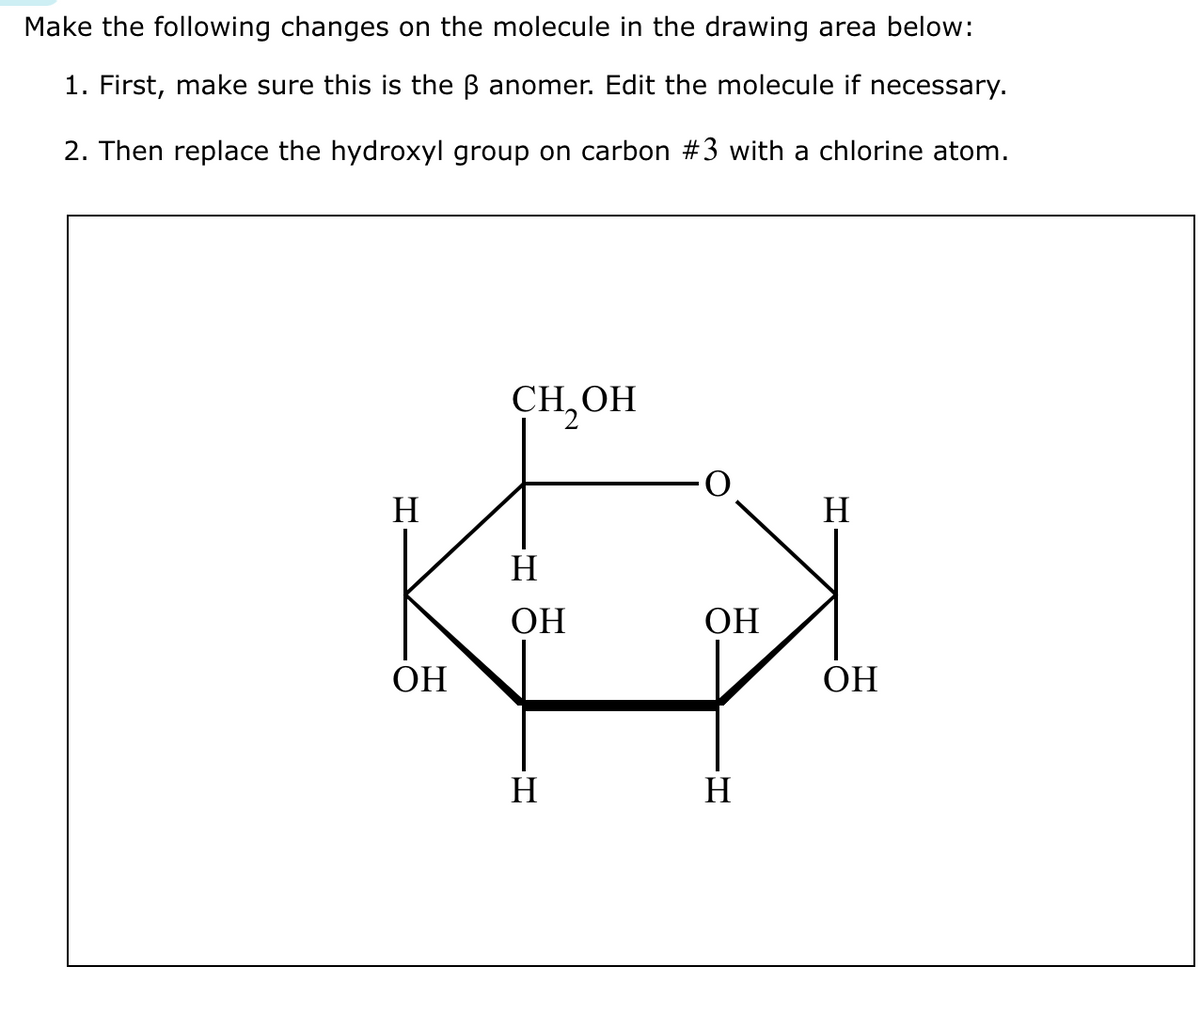 Make the following changes on the molecule in the drawing area below:
1. First, make sure this is the B anomer. Edit the molecule if necessary.
2. Then replace the hydroxyl group on carbon #3 with a chlorine atom.
Н
ОН
CH OH
H
ОН
H
ОН
Н
H
ОН